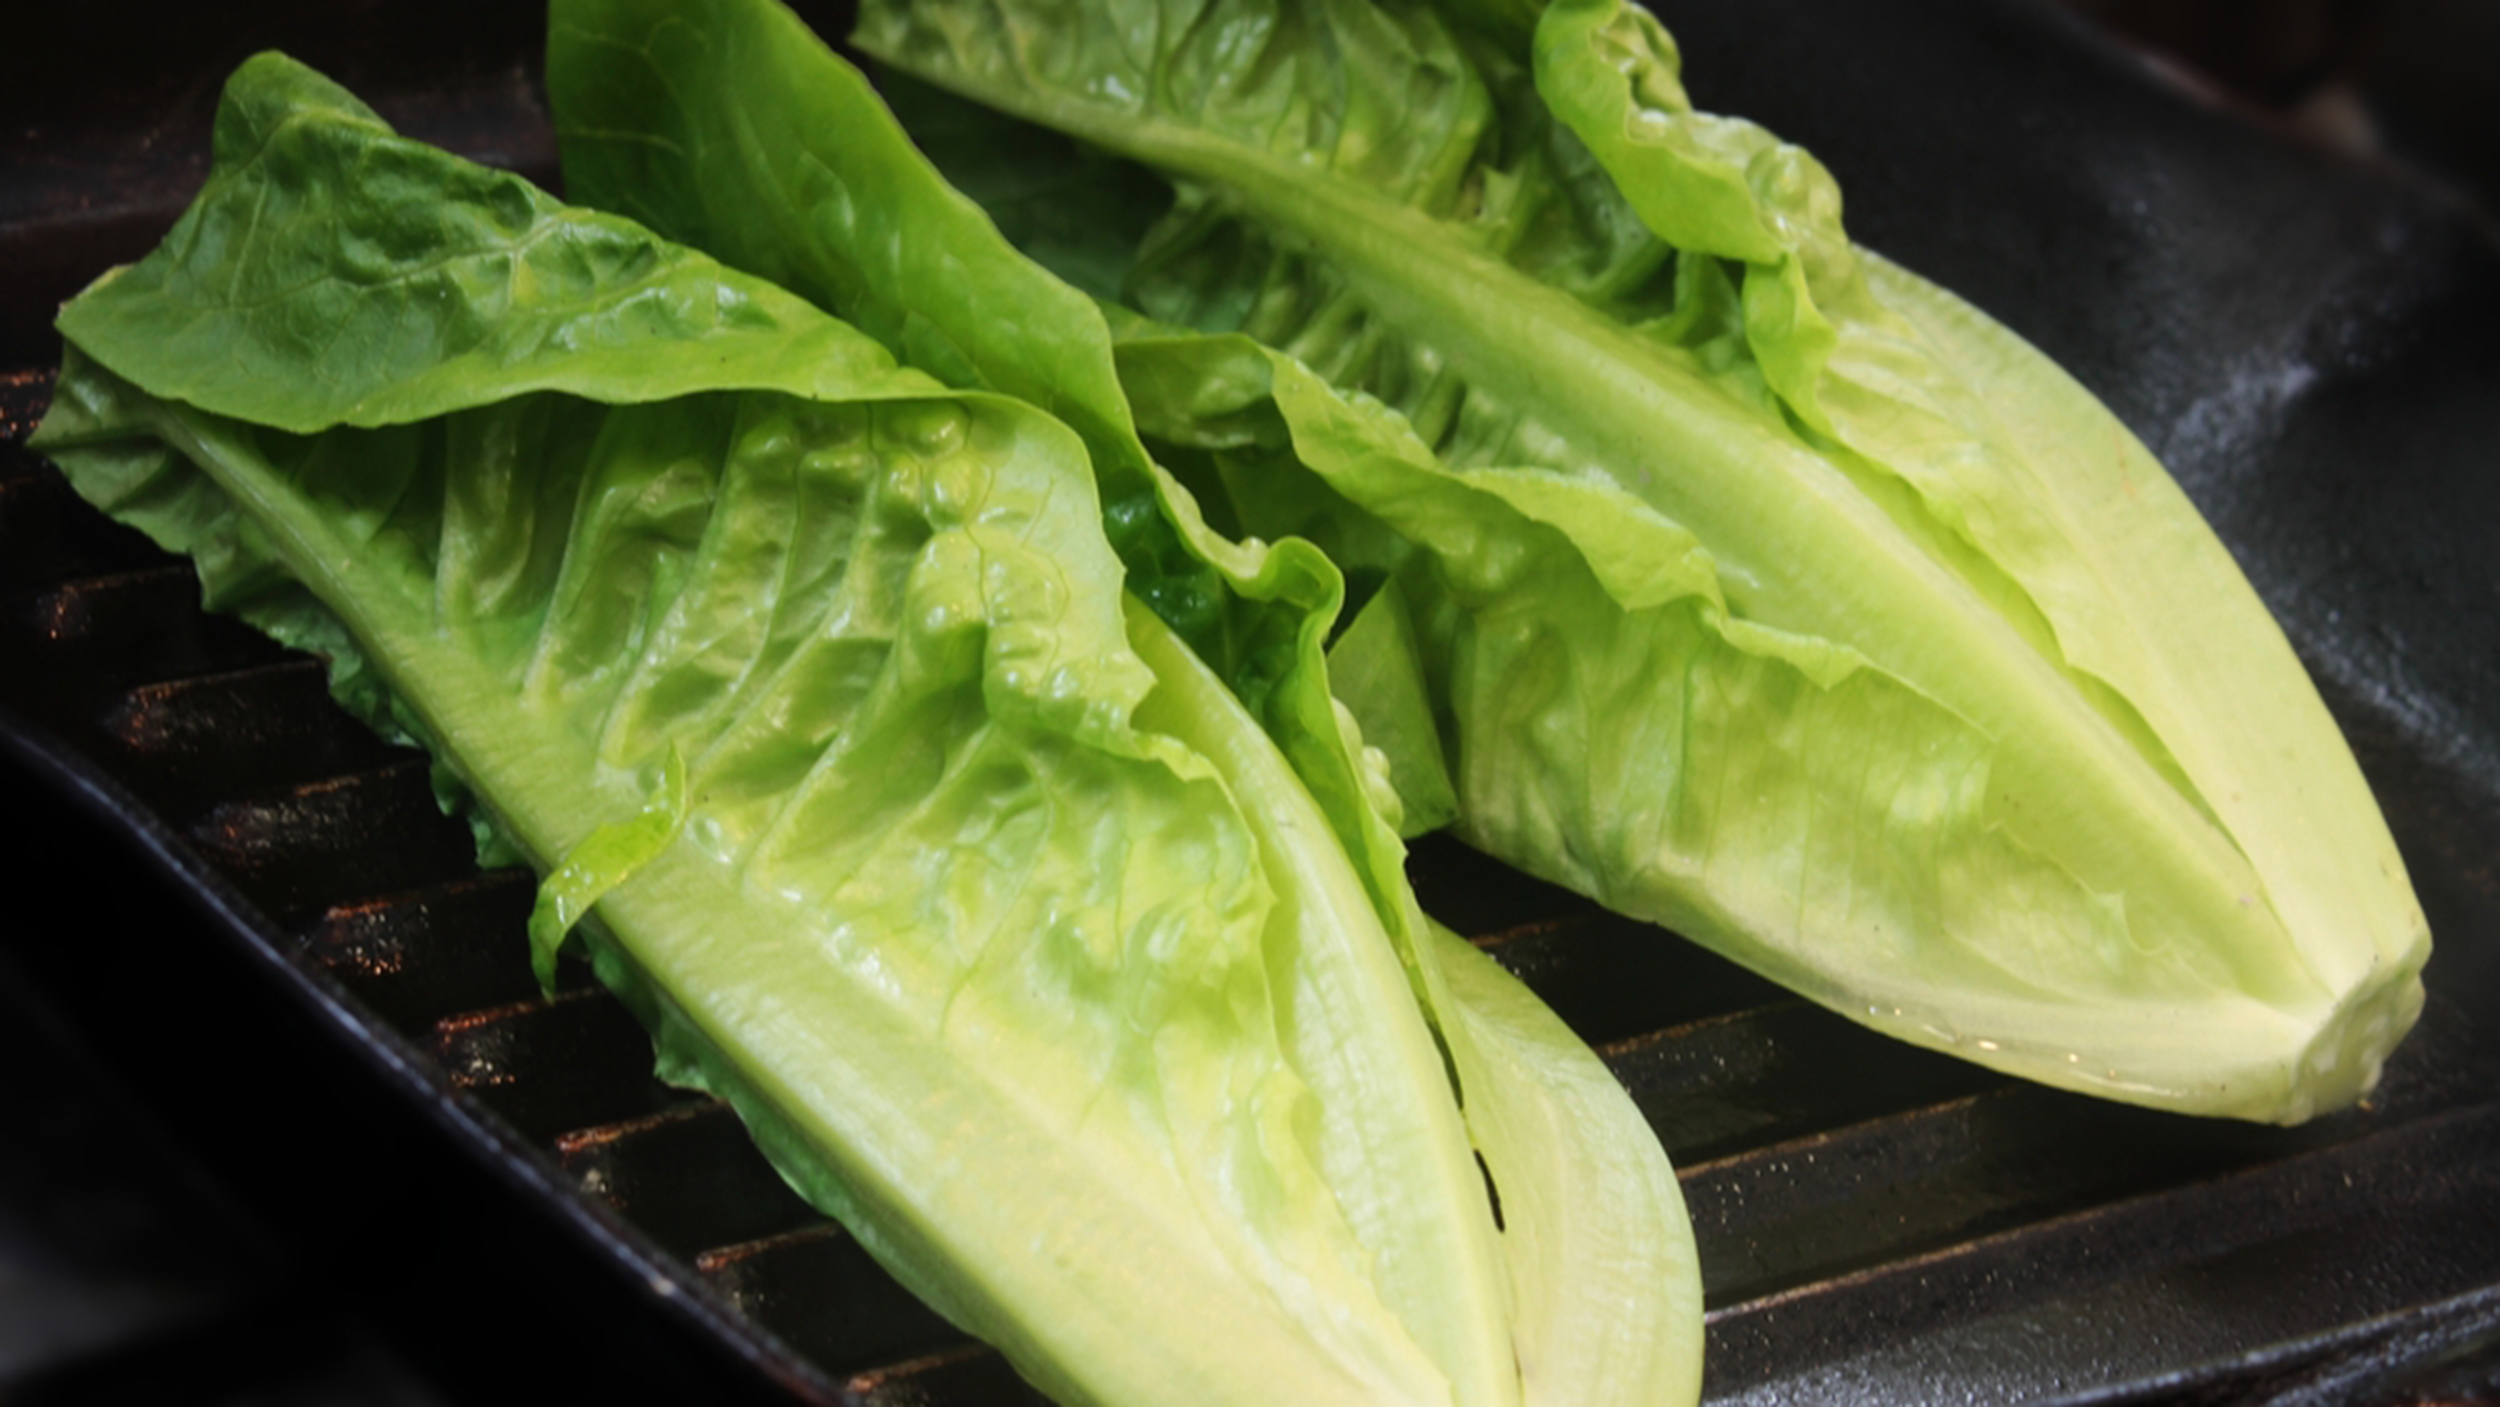 Is it safe to eat romaine lettuce now?